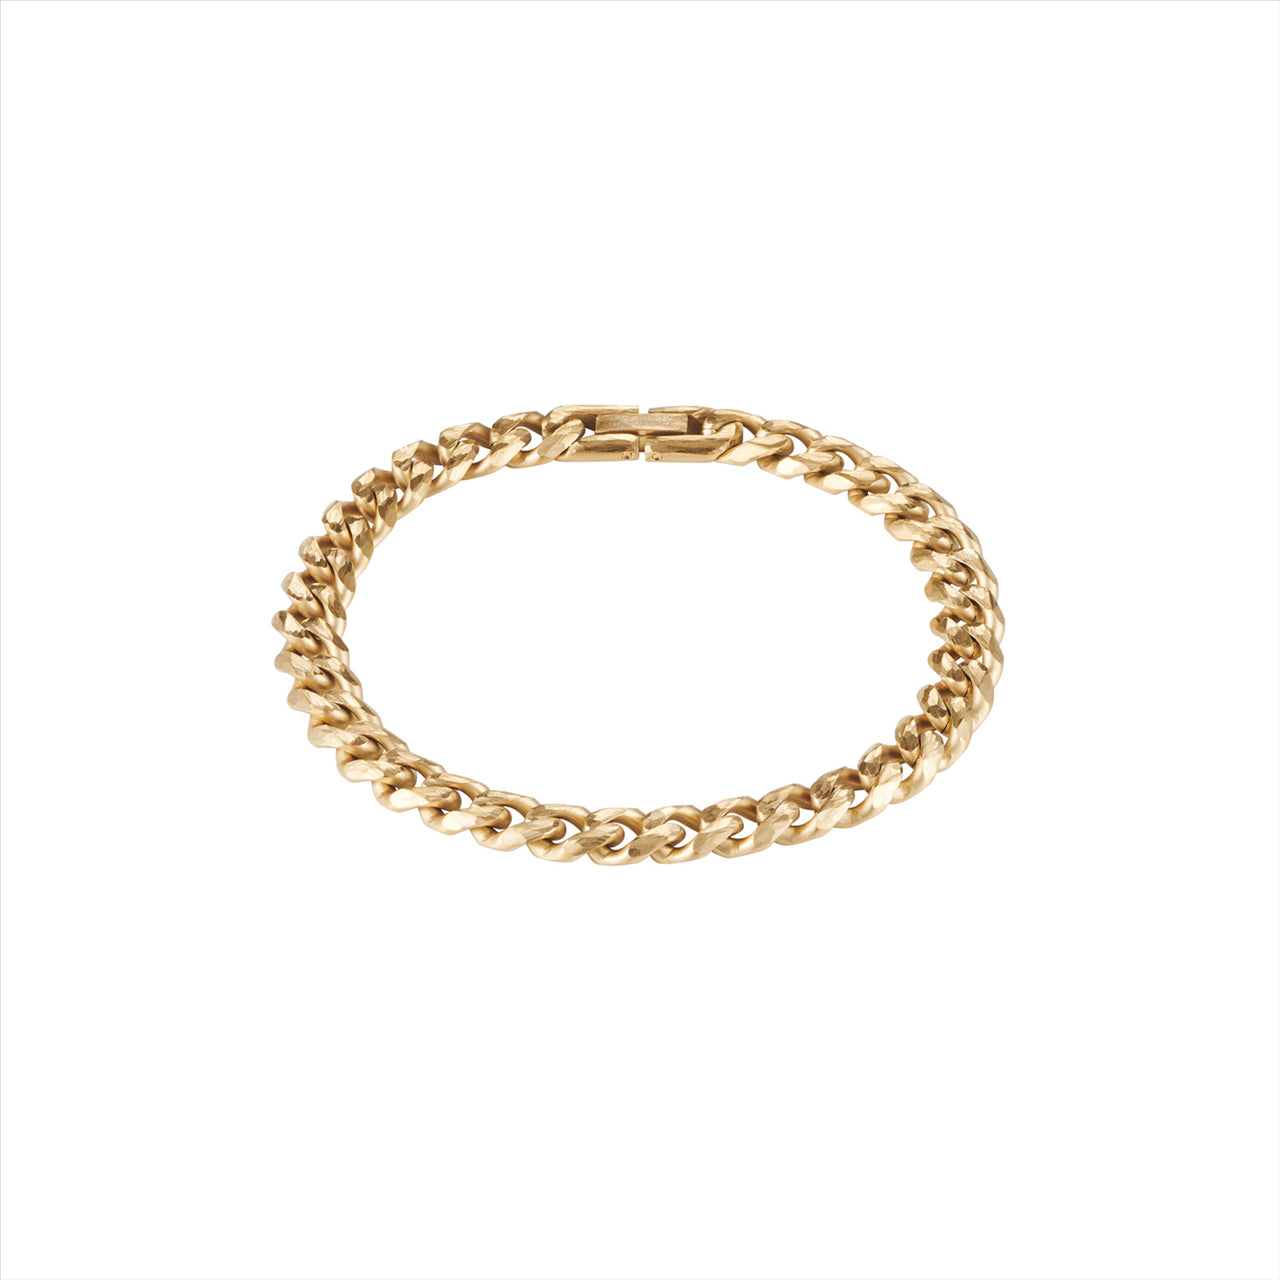 IP Polished 14k Gold Stainless Steel Curb-link Chain Bracelet